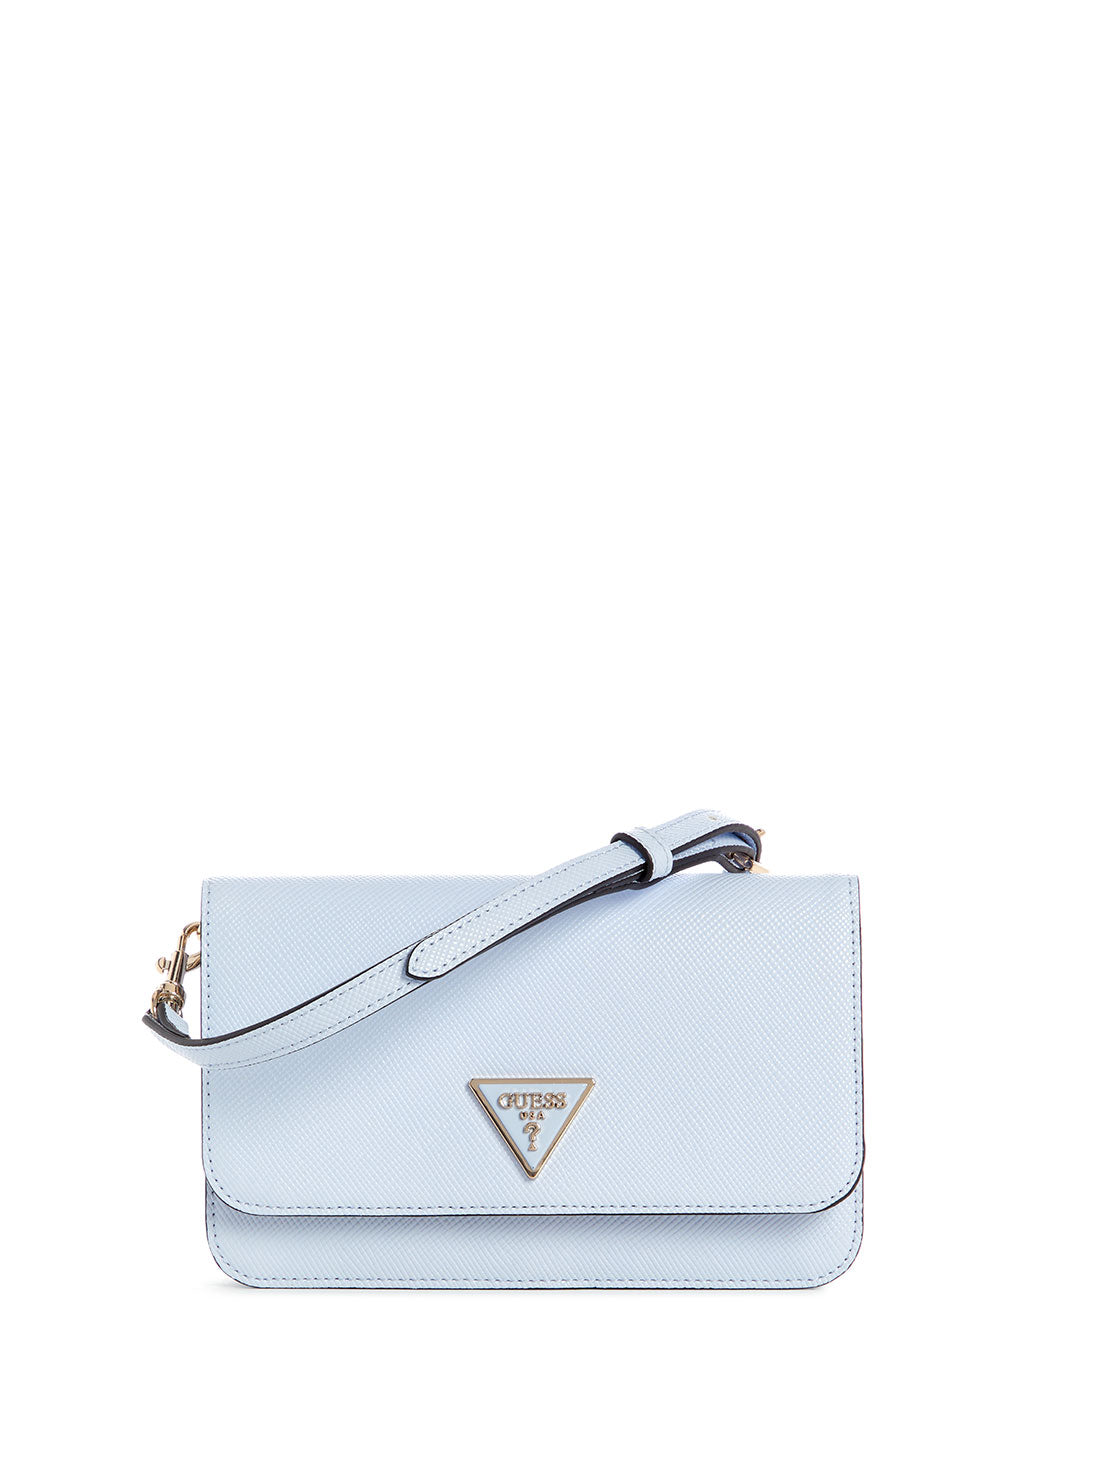 GUESS Sky Blue Noelle Crossbody Bag front view